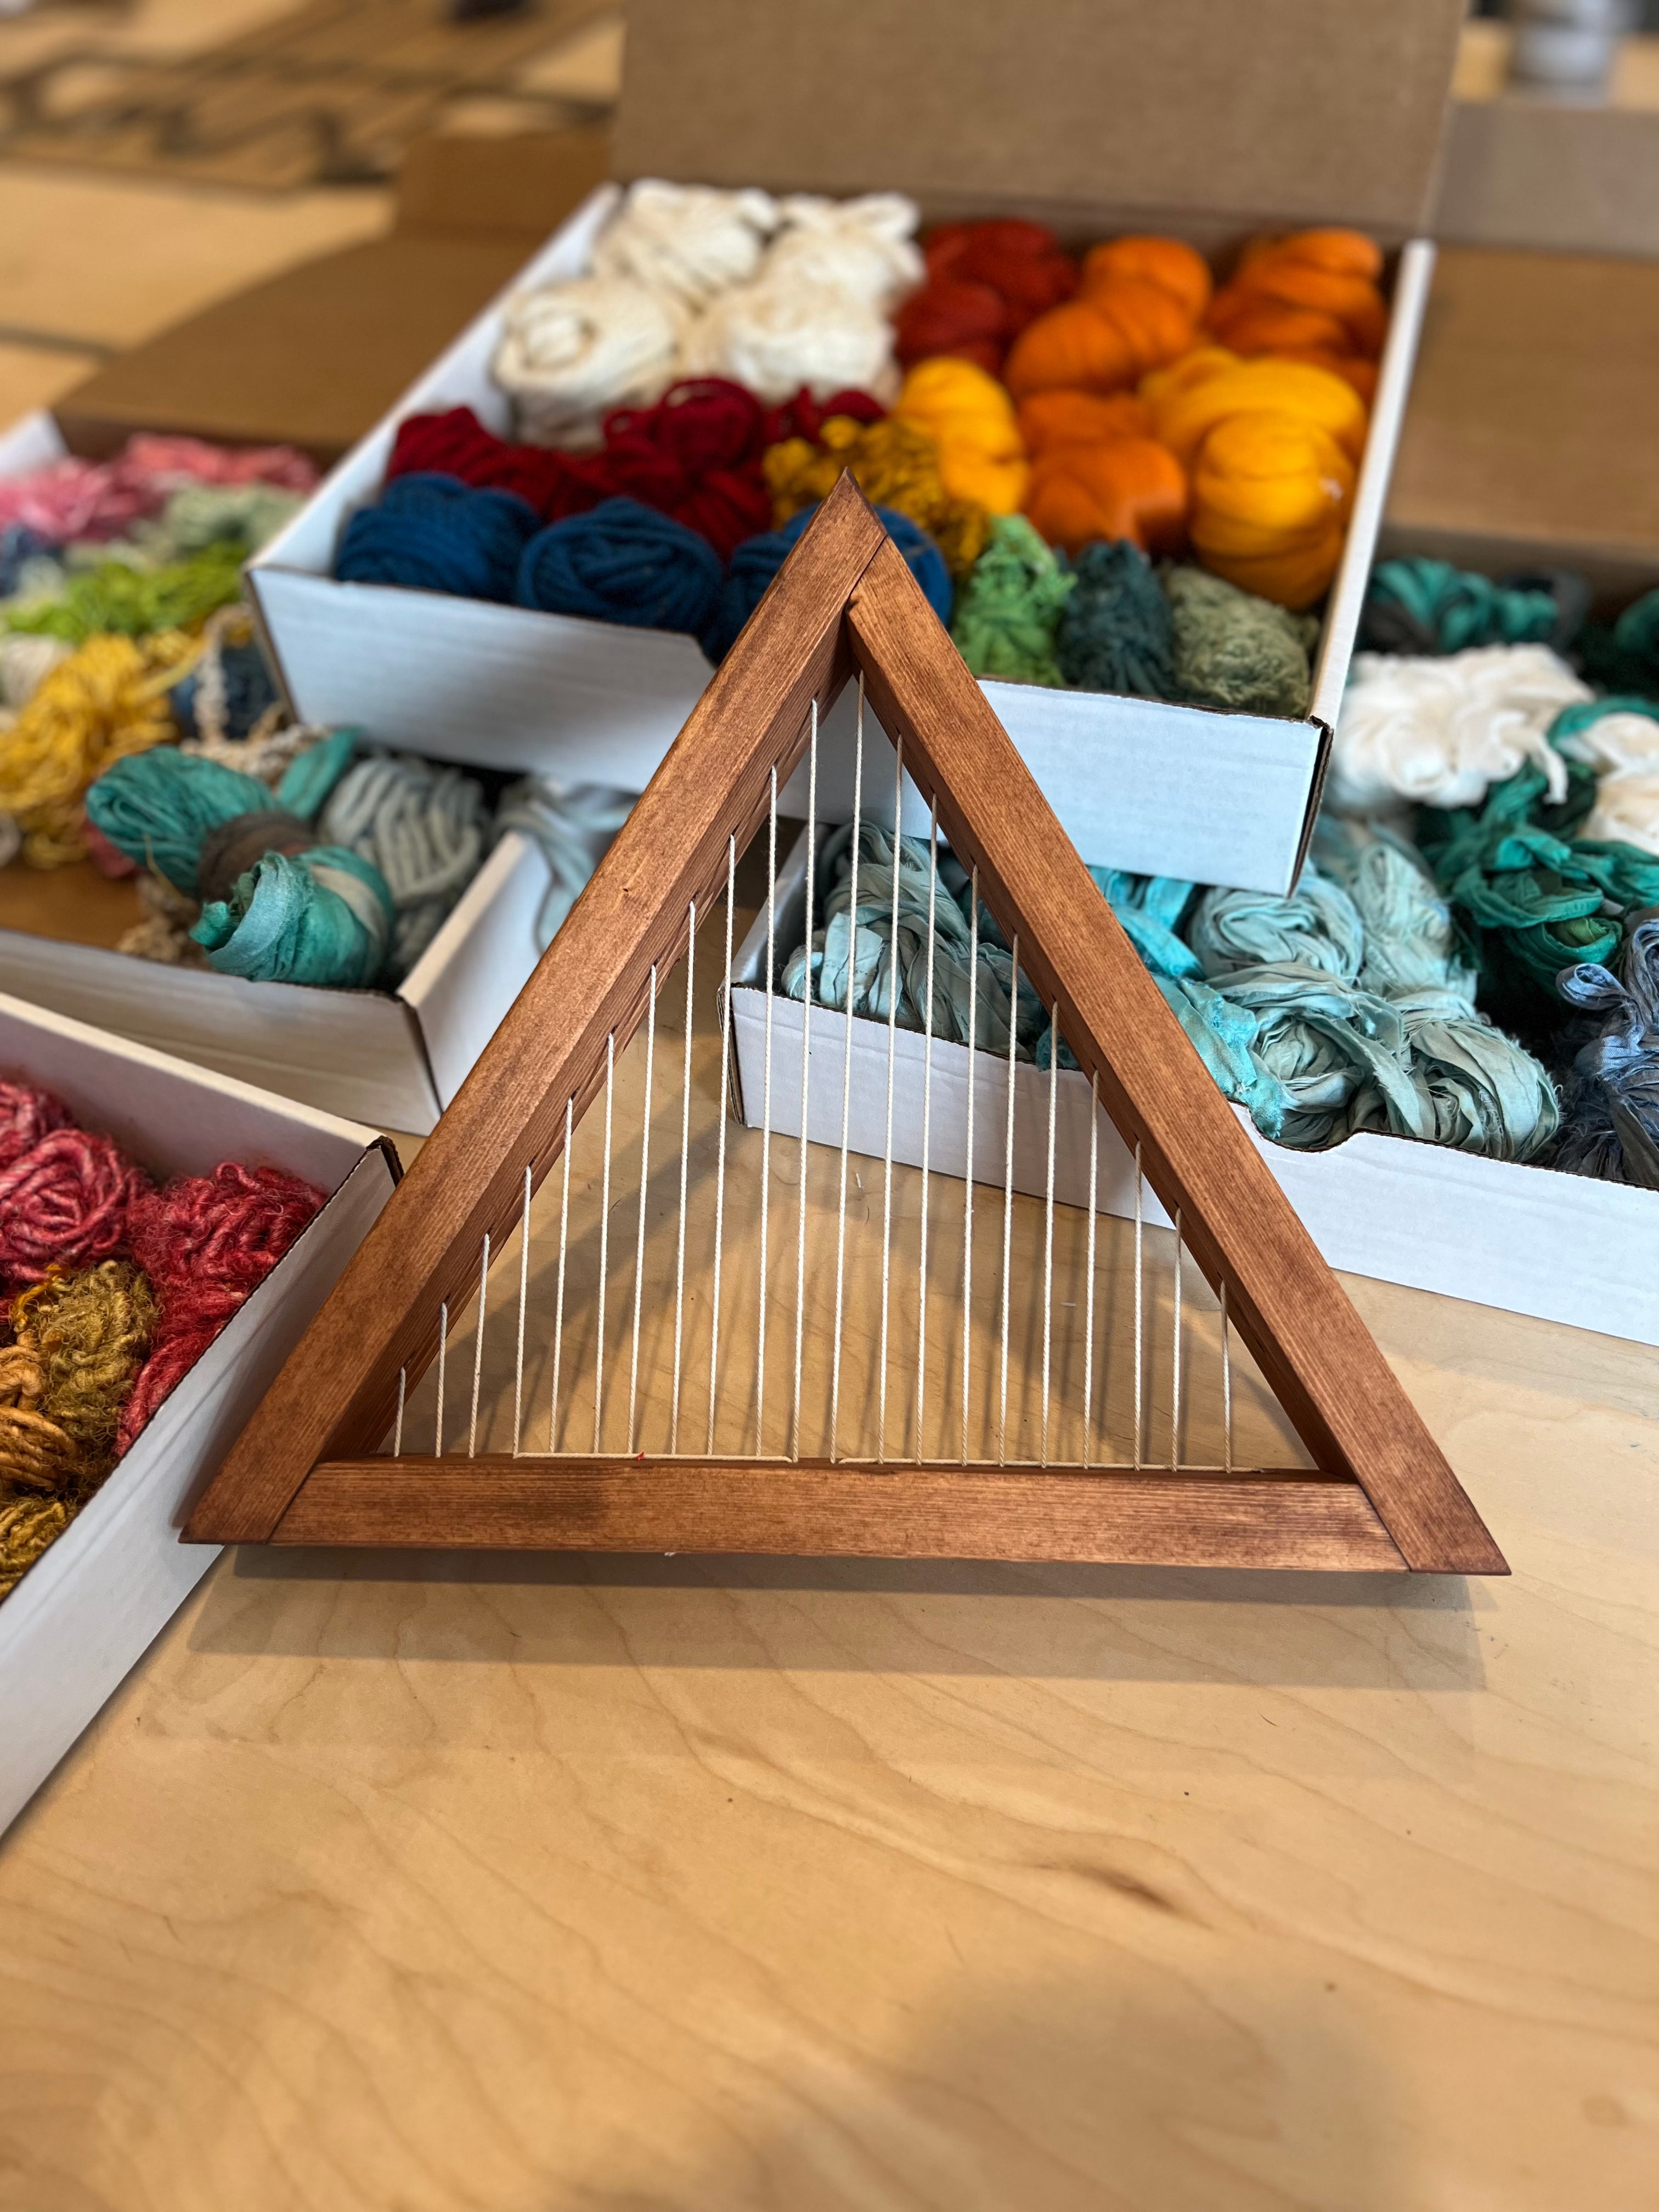 Tapestry triangle kit